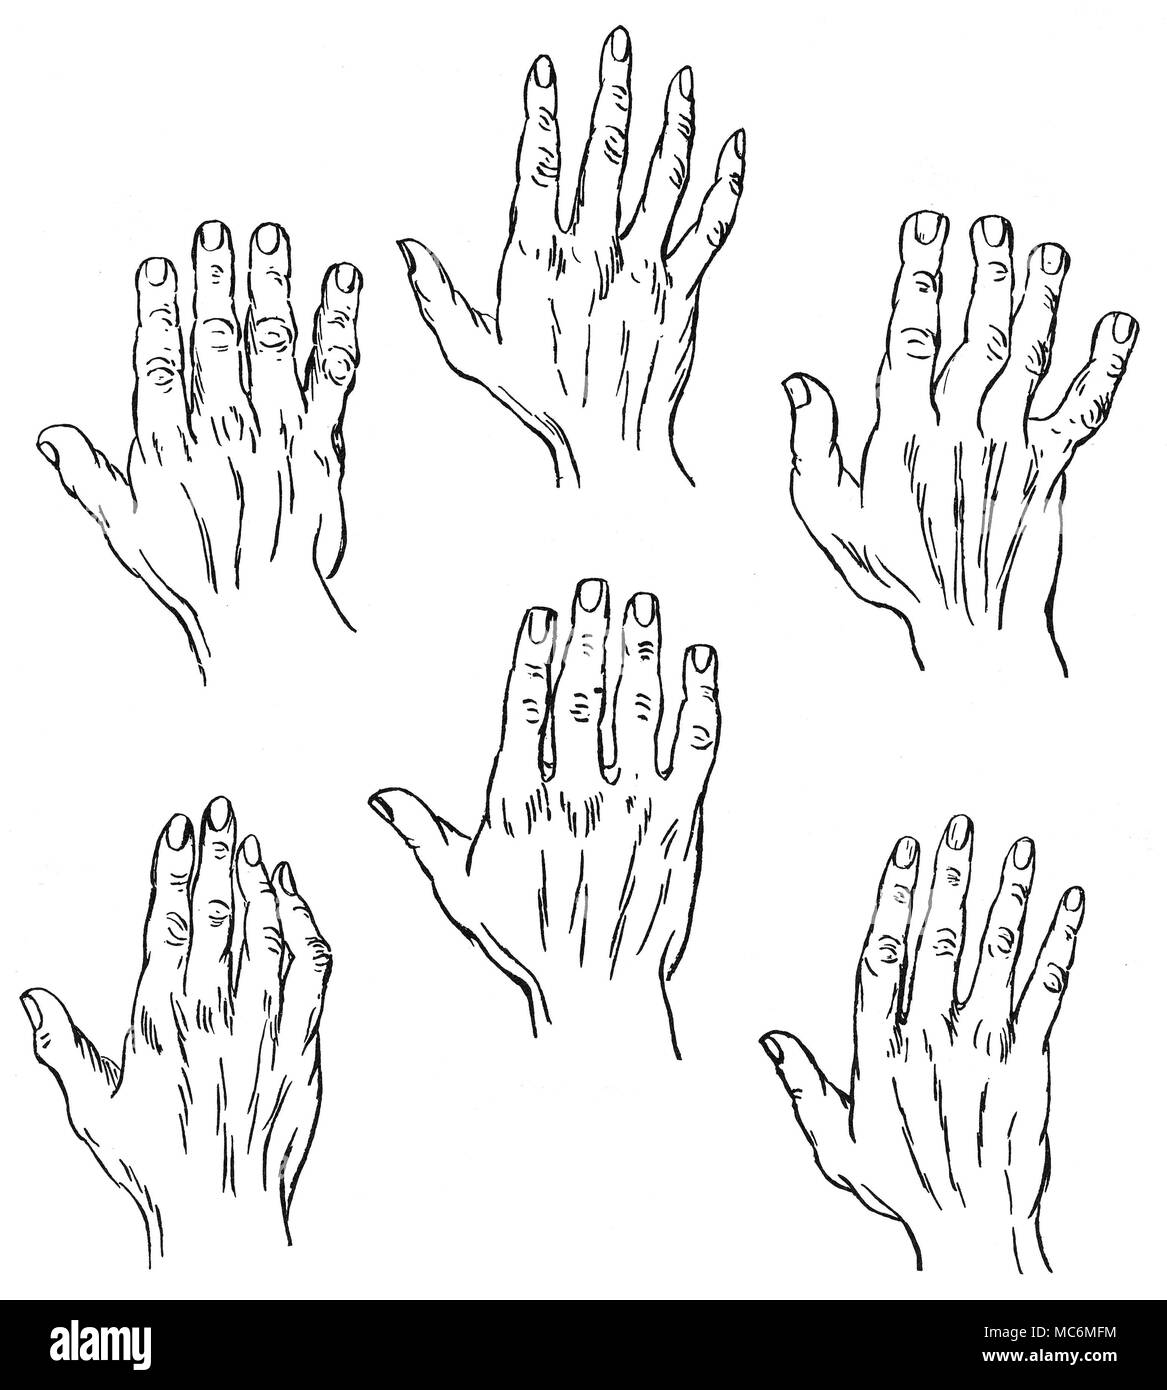 PALMISTRY - CHIROGNOMY The study of the form of the hand, in its relation to personality, is called Chirognomy, and is an important division of Palmistry. Among the many attempts to classify hand types, is that proposed by the French palmist, Casimir Stanislas D'Arpentigny (born 1798). D'Arpentigny proposed six basic hand types, along with a seventh, which included elements from two or more of these types. The drawings here illustrate (top left); the Elementary, the Psychic, the Spatulate, and (bottom left); the Knotty (or Philosophic), the Square, and the Conic. From D'Arpentigny, L Stock Photo